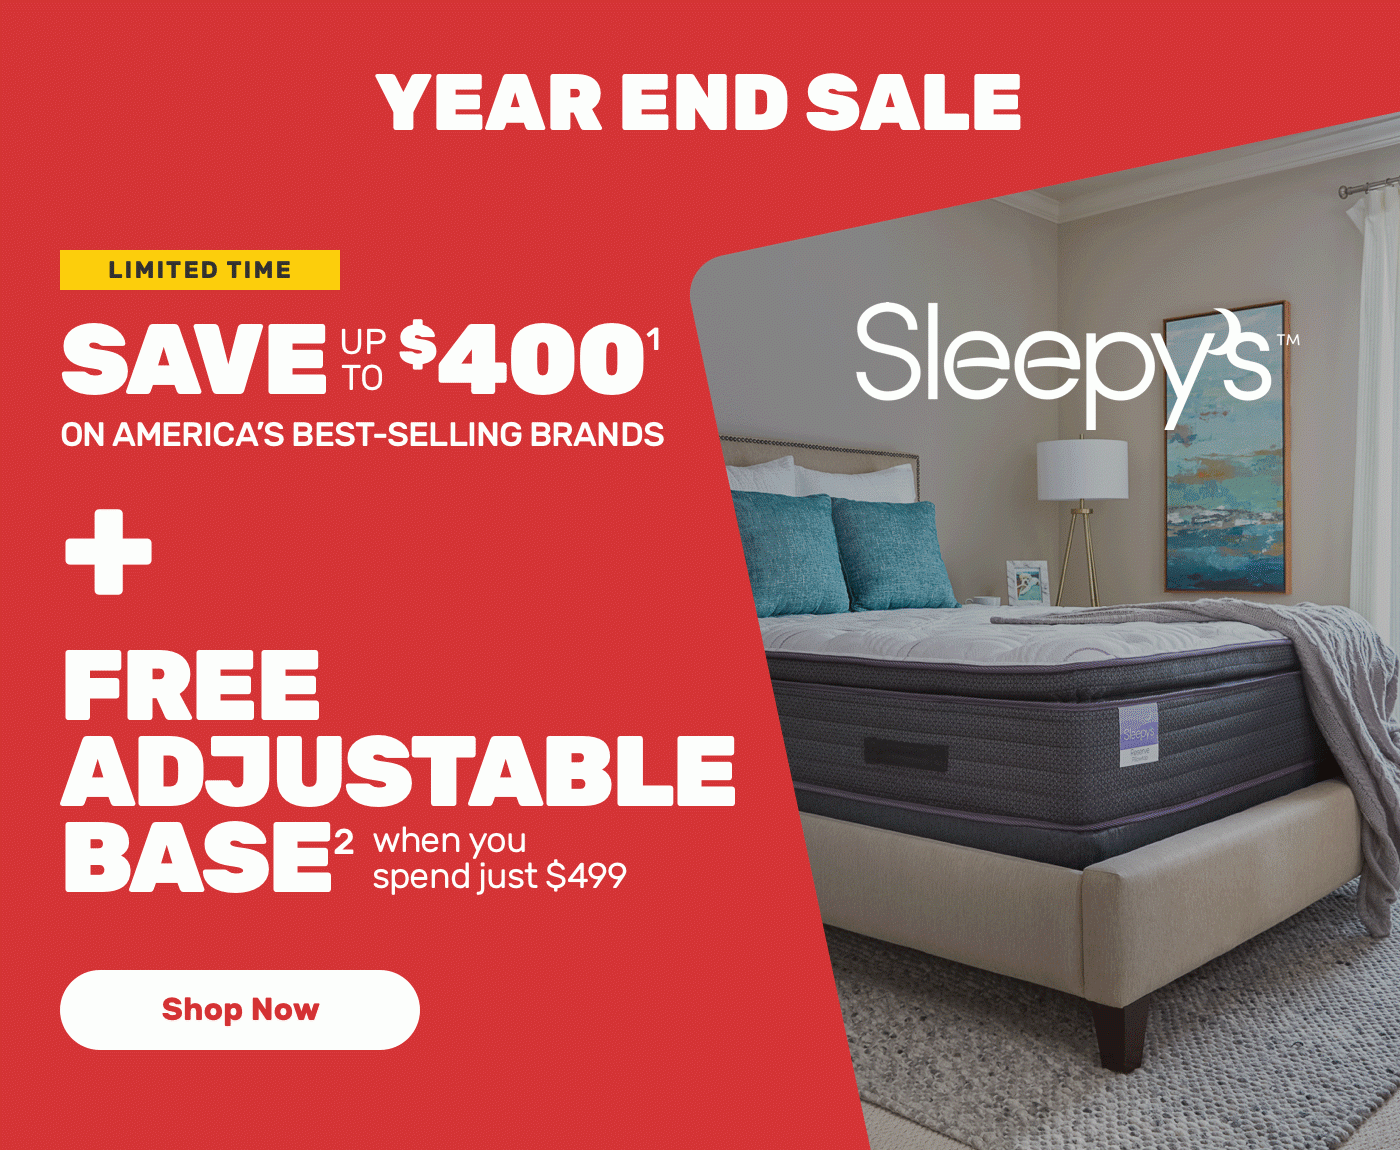 Year End Sale. Save up to $400 on America's Best Selling Brands + Free Adjustable Base when you spend just $499. Shop Now.